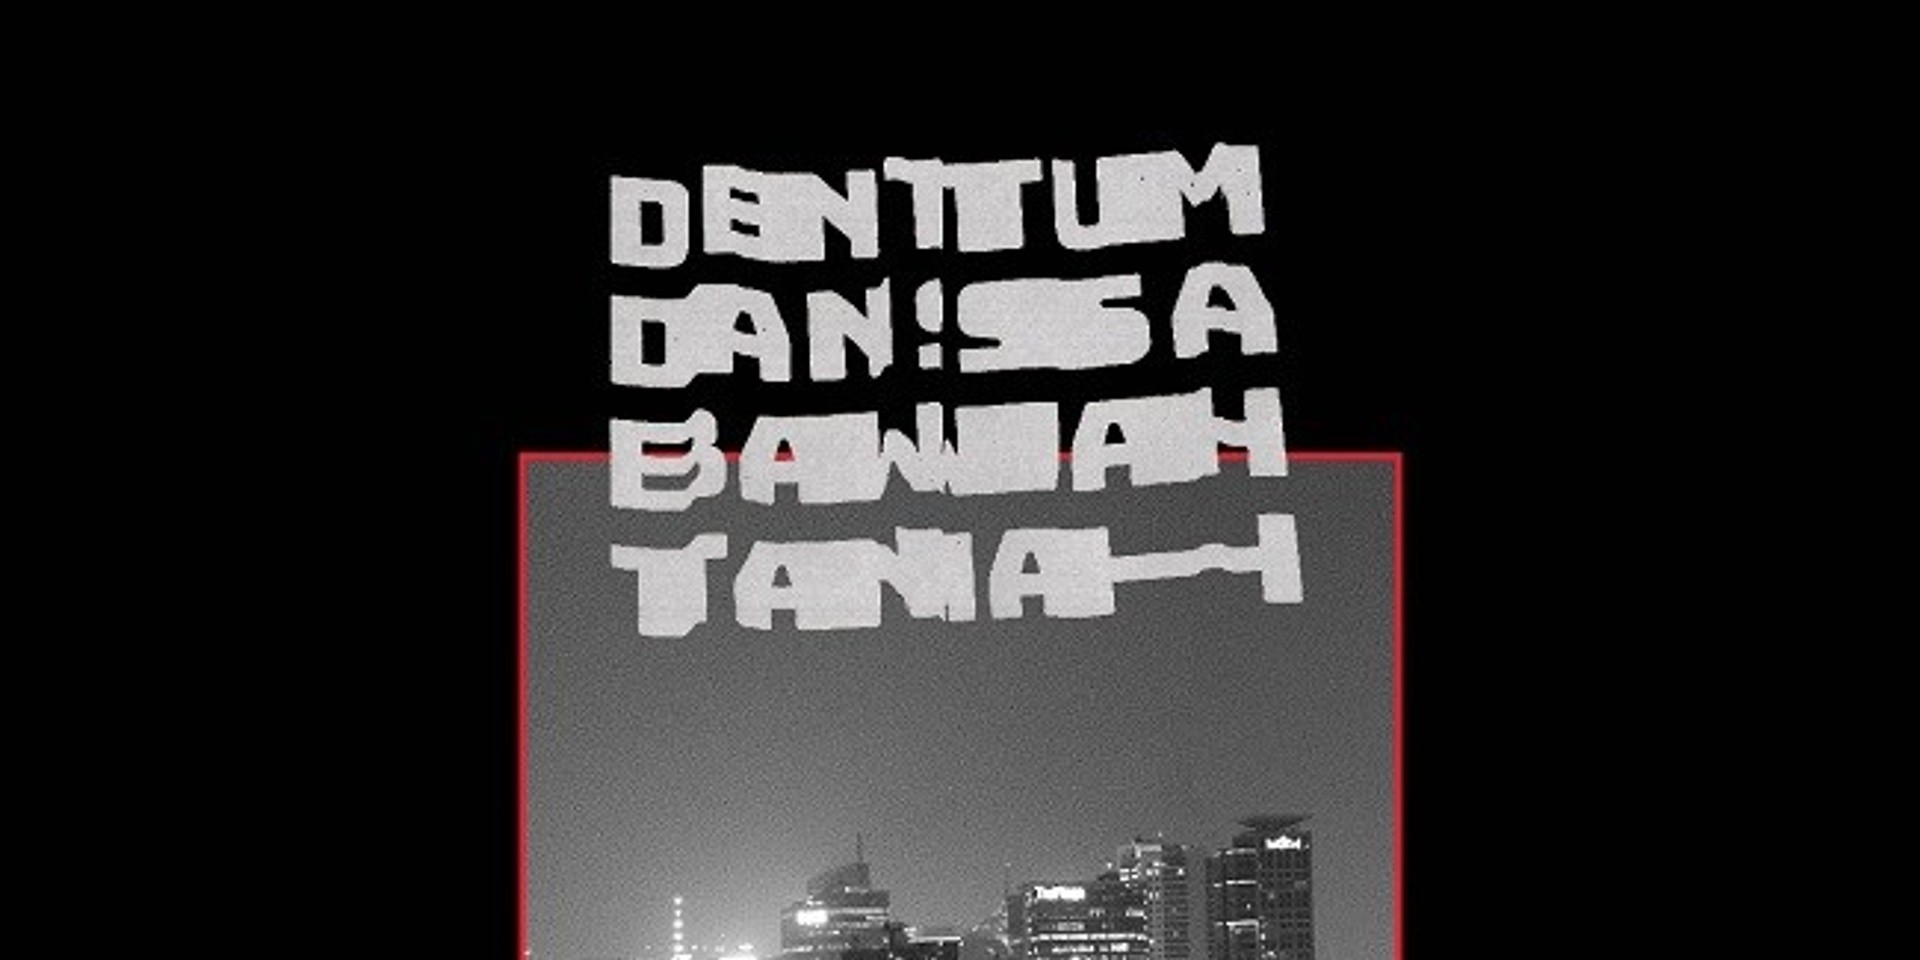 Indonesian electronic compilation album to receive official launch